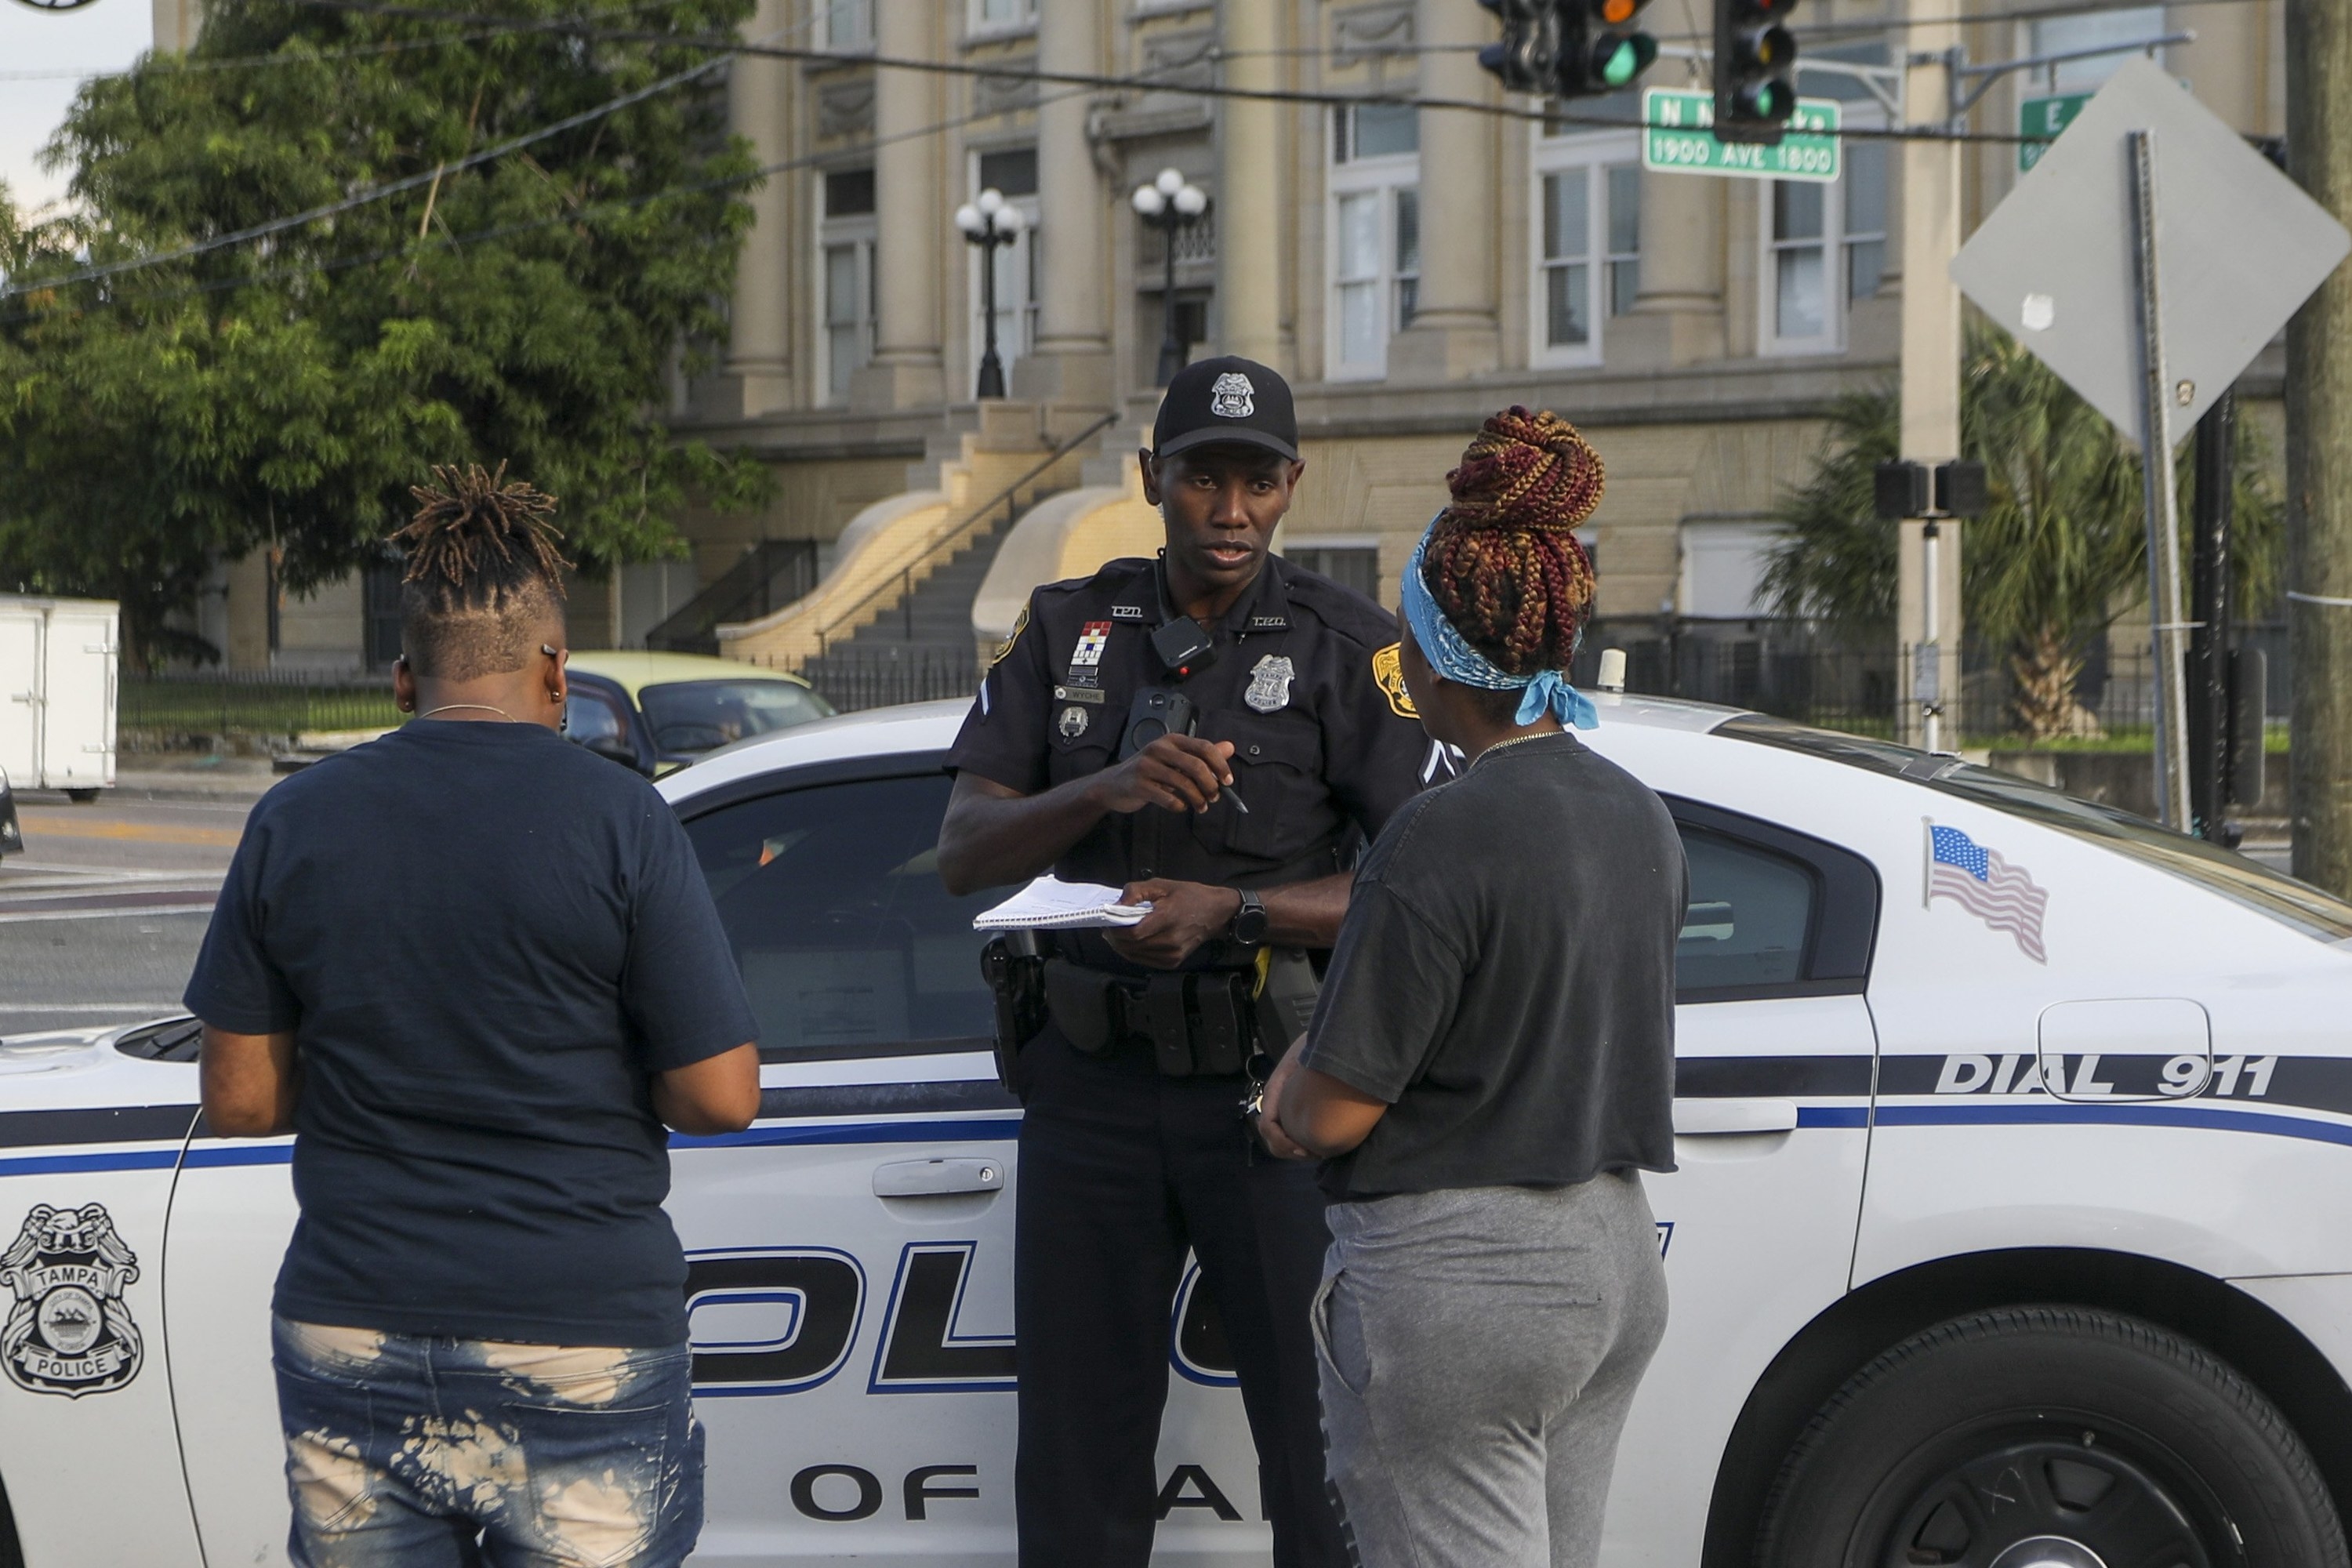 Officer Jerry Wyche speaks with people who got into a minor car accident, standing by a police vehicle